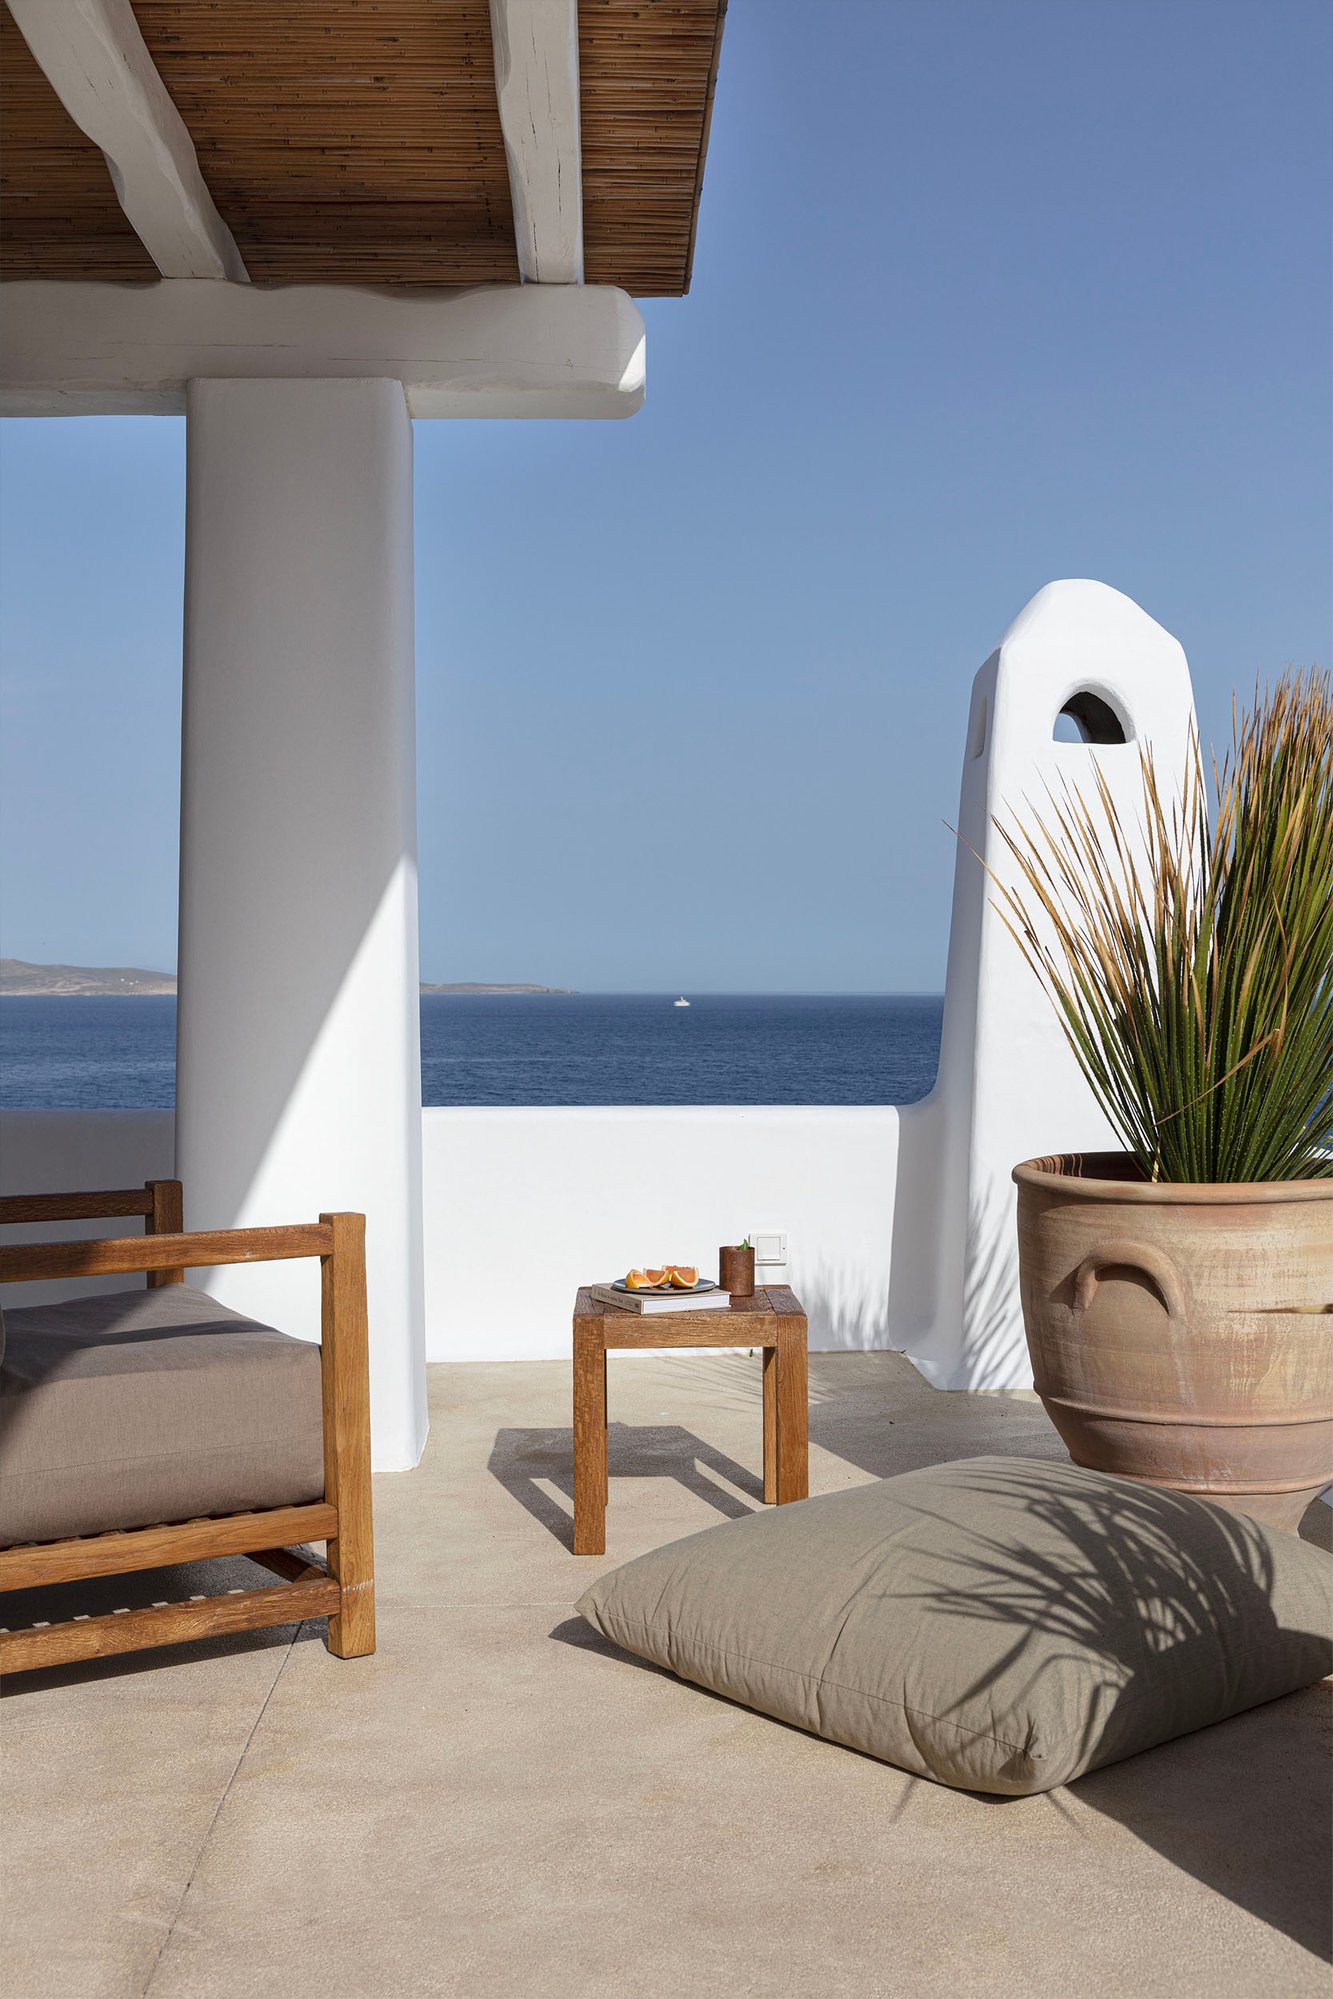 Our essential tips for a luxury holiday to Mykonos